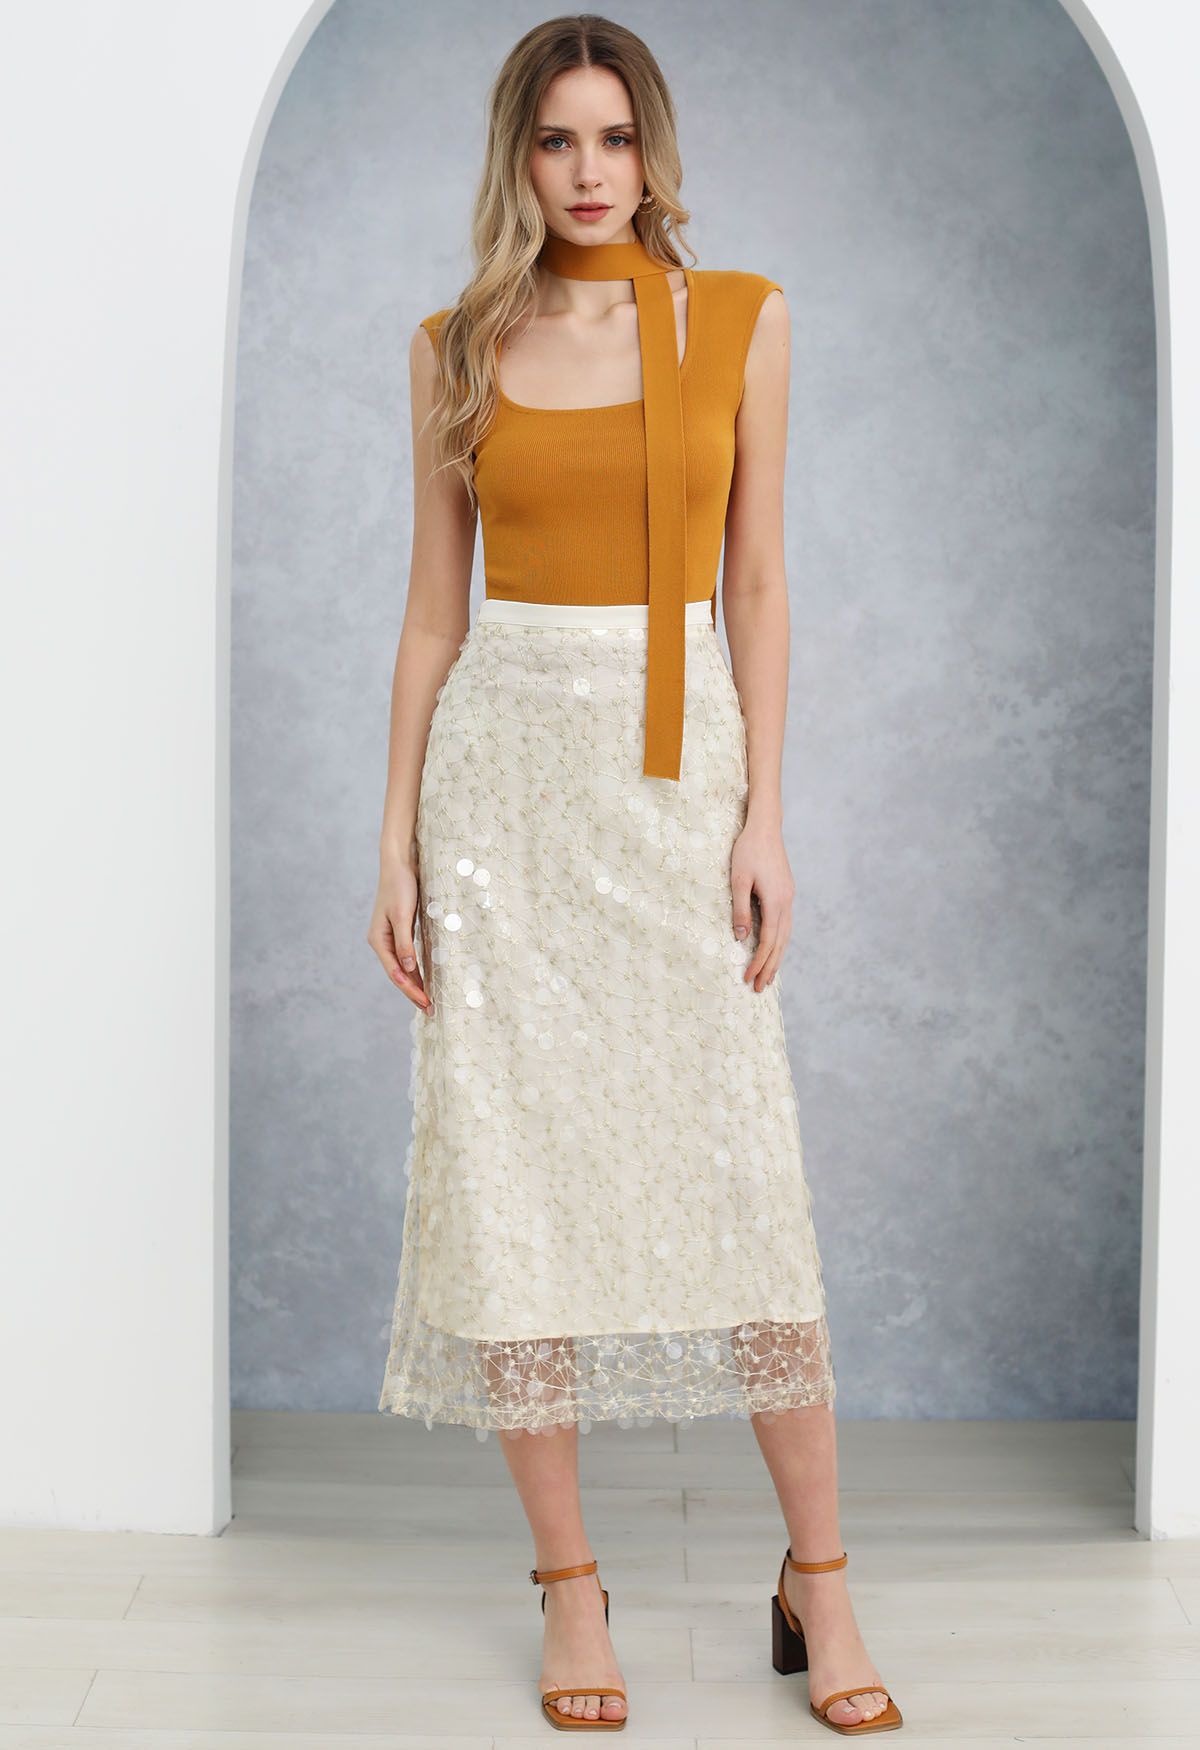 Square Neck Sleeveless Knit Top with Sash in Pumpkin